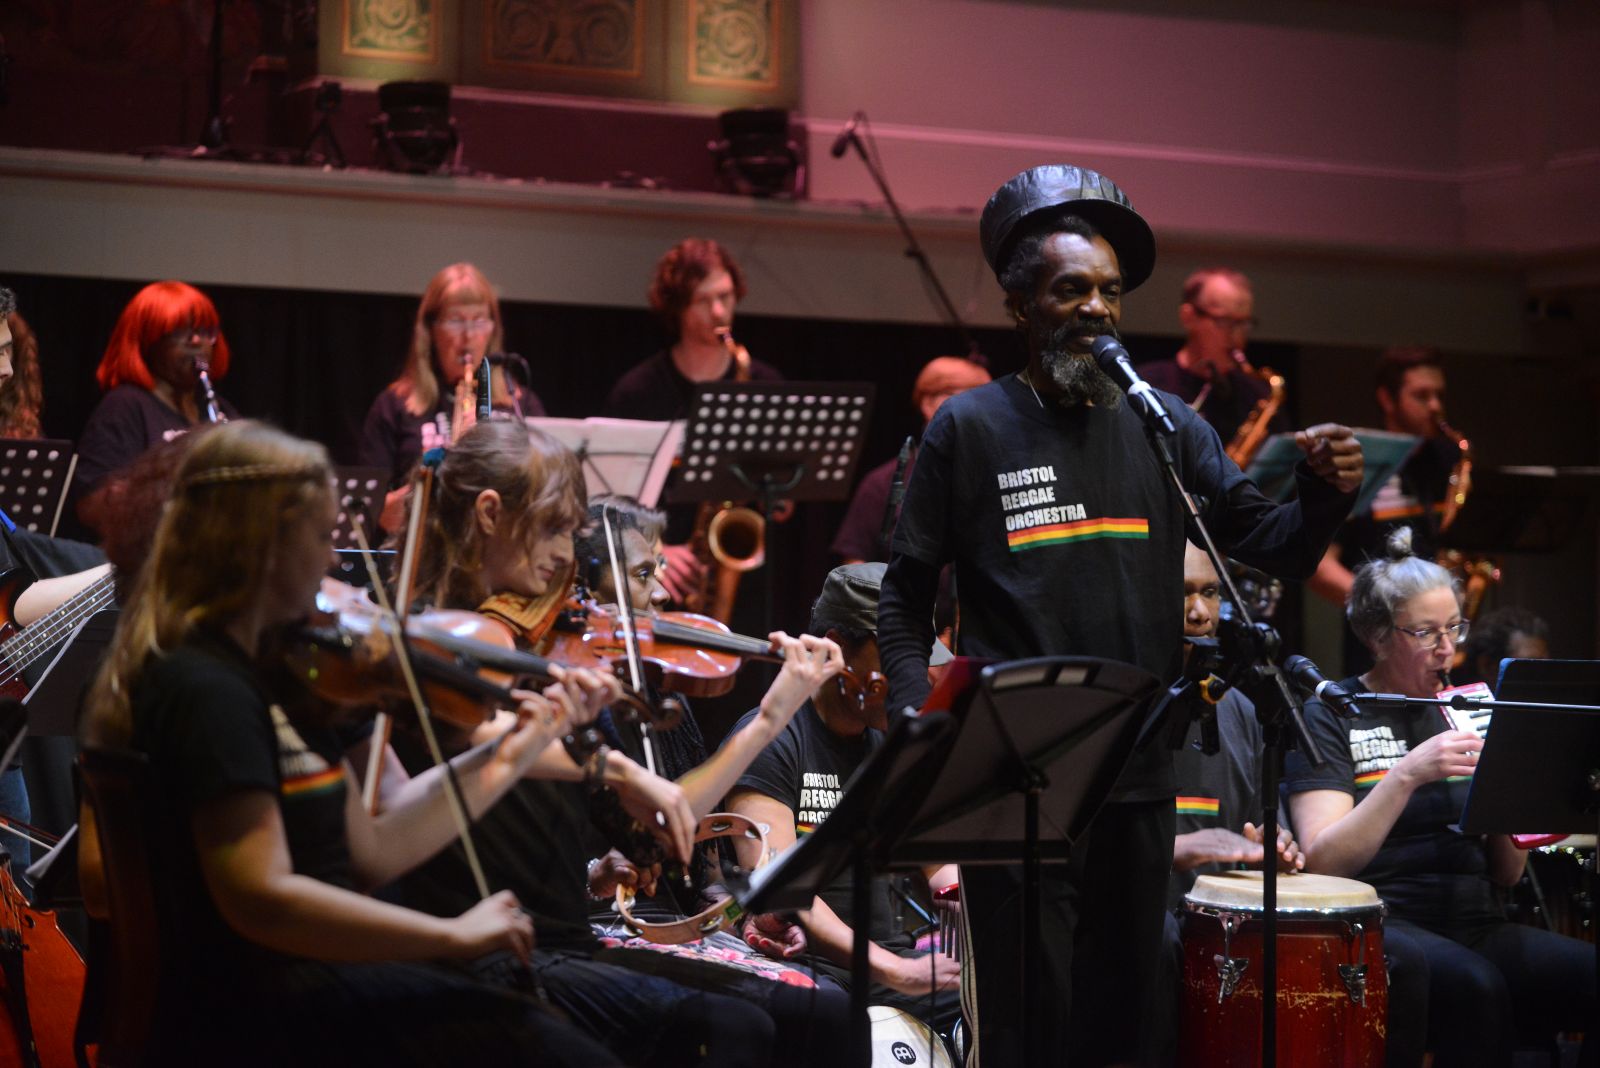 The Bristol Reggae Orchestra performing at St George's Concert Hall. Photo: Michael Lloyd